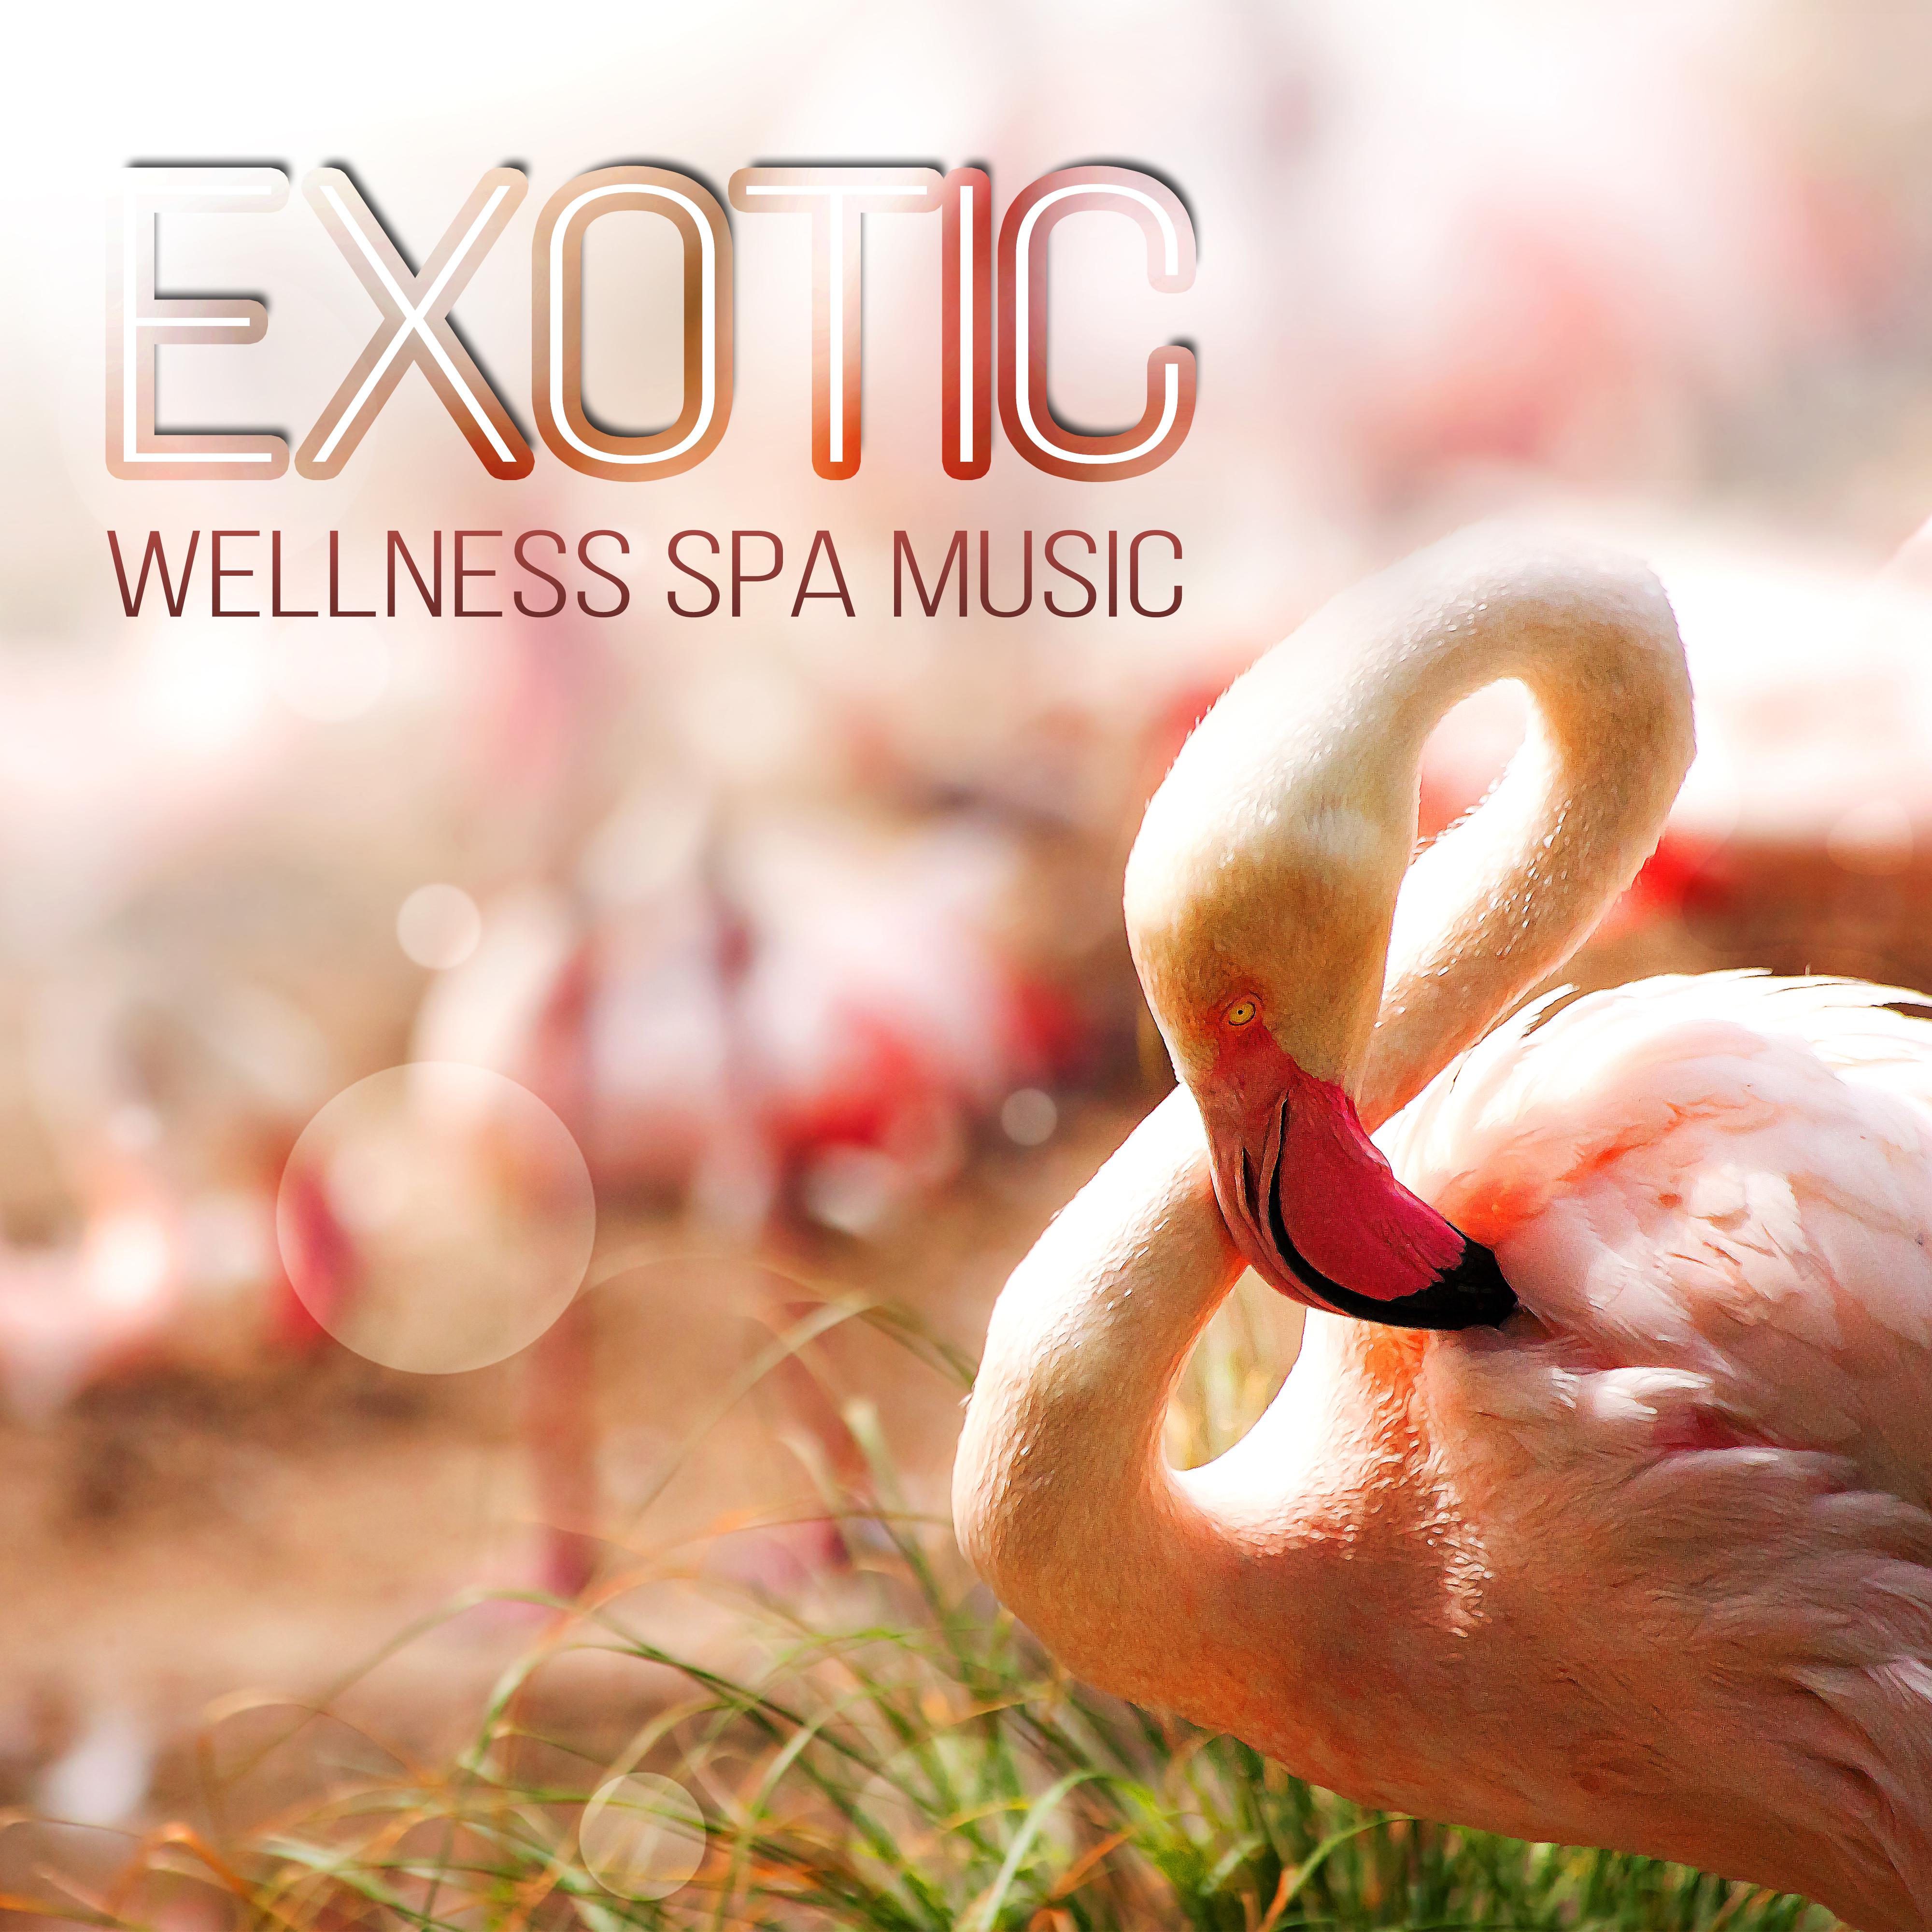 Exotic Wellness Spa Music – New Age Songs for Spa Breaks, Relaxation & Meditation, Sound Therapy, Massage, Reiki, Stress Relief & Well Being